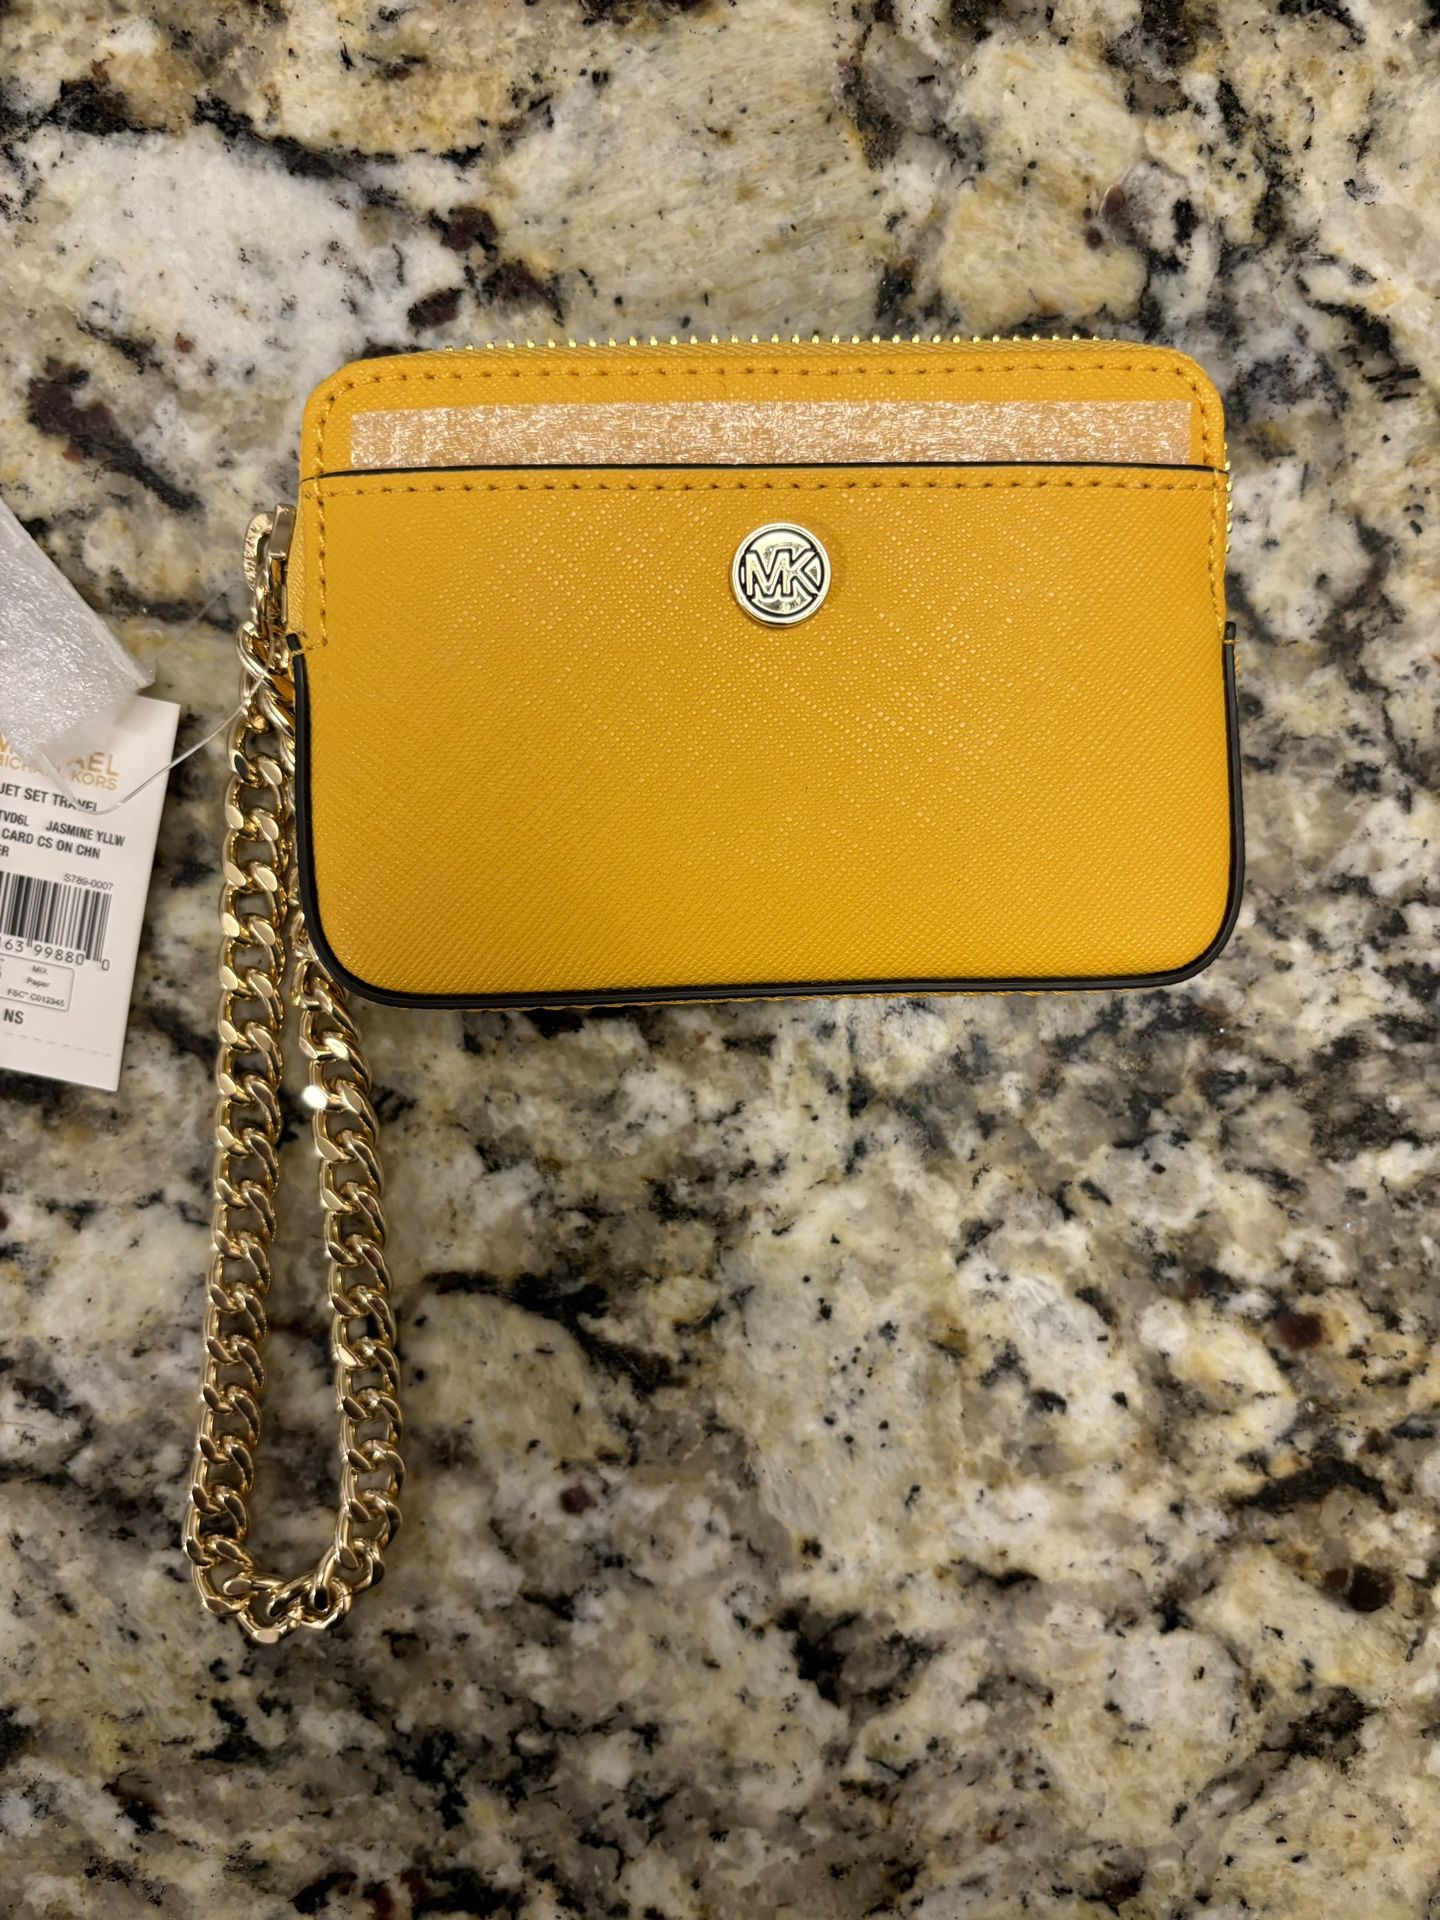 Michael Kors Chain Wristlet New With Tags